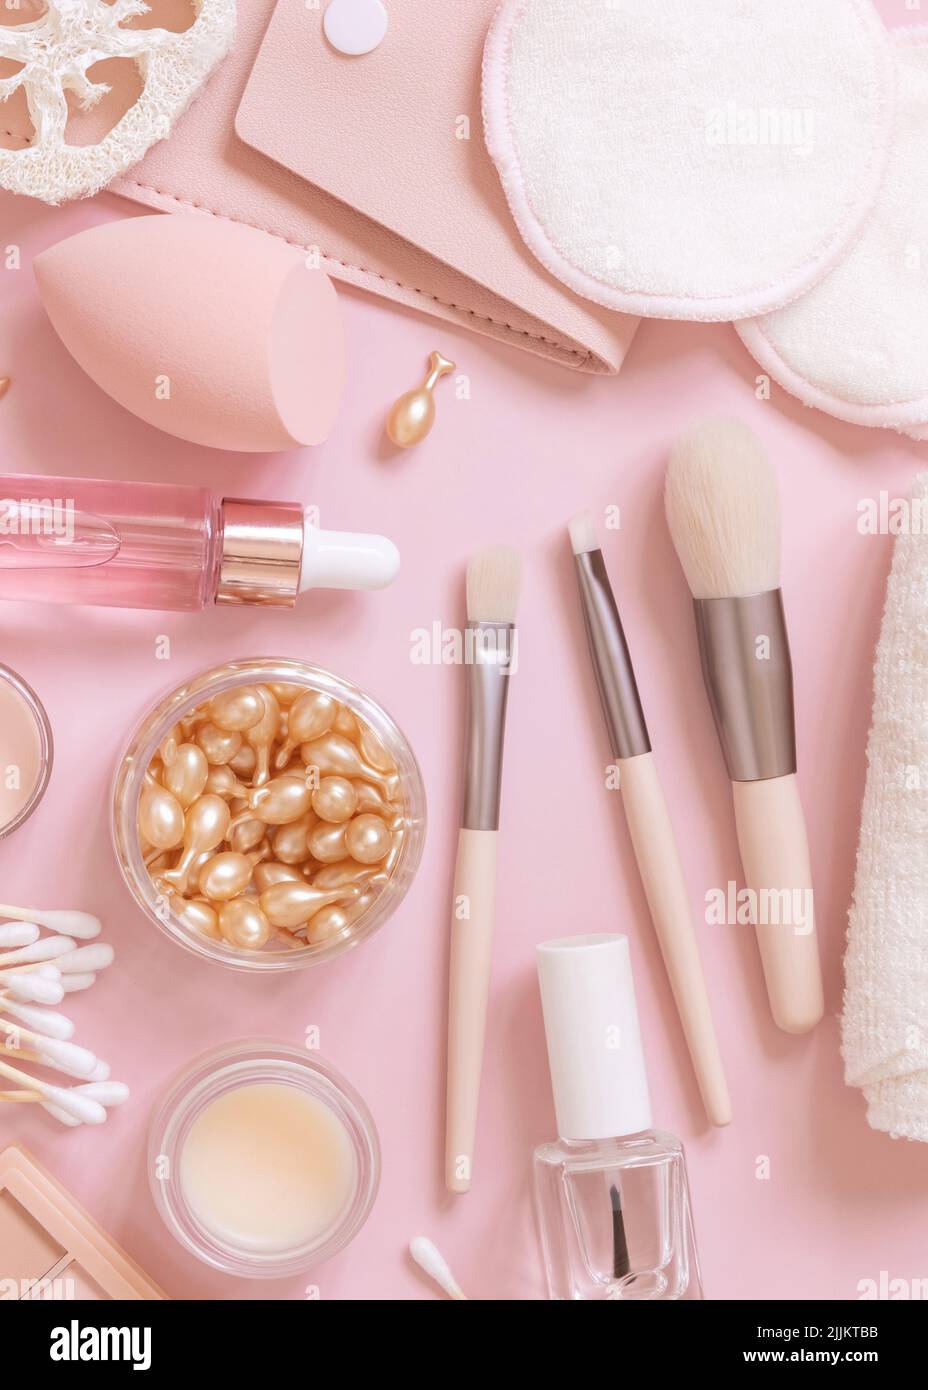 Makeup products and decorative cosmetics on pink background flat lay.  Fashion and beauty blogging concept. Top view, copy space Stock Photo -  Alamy